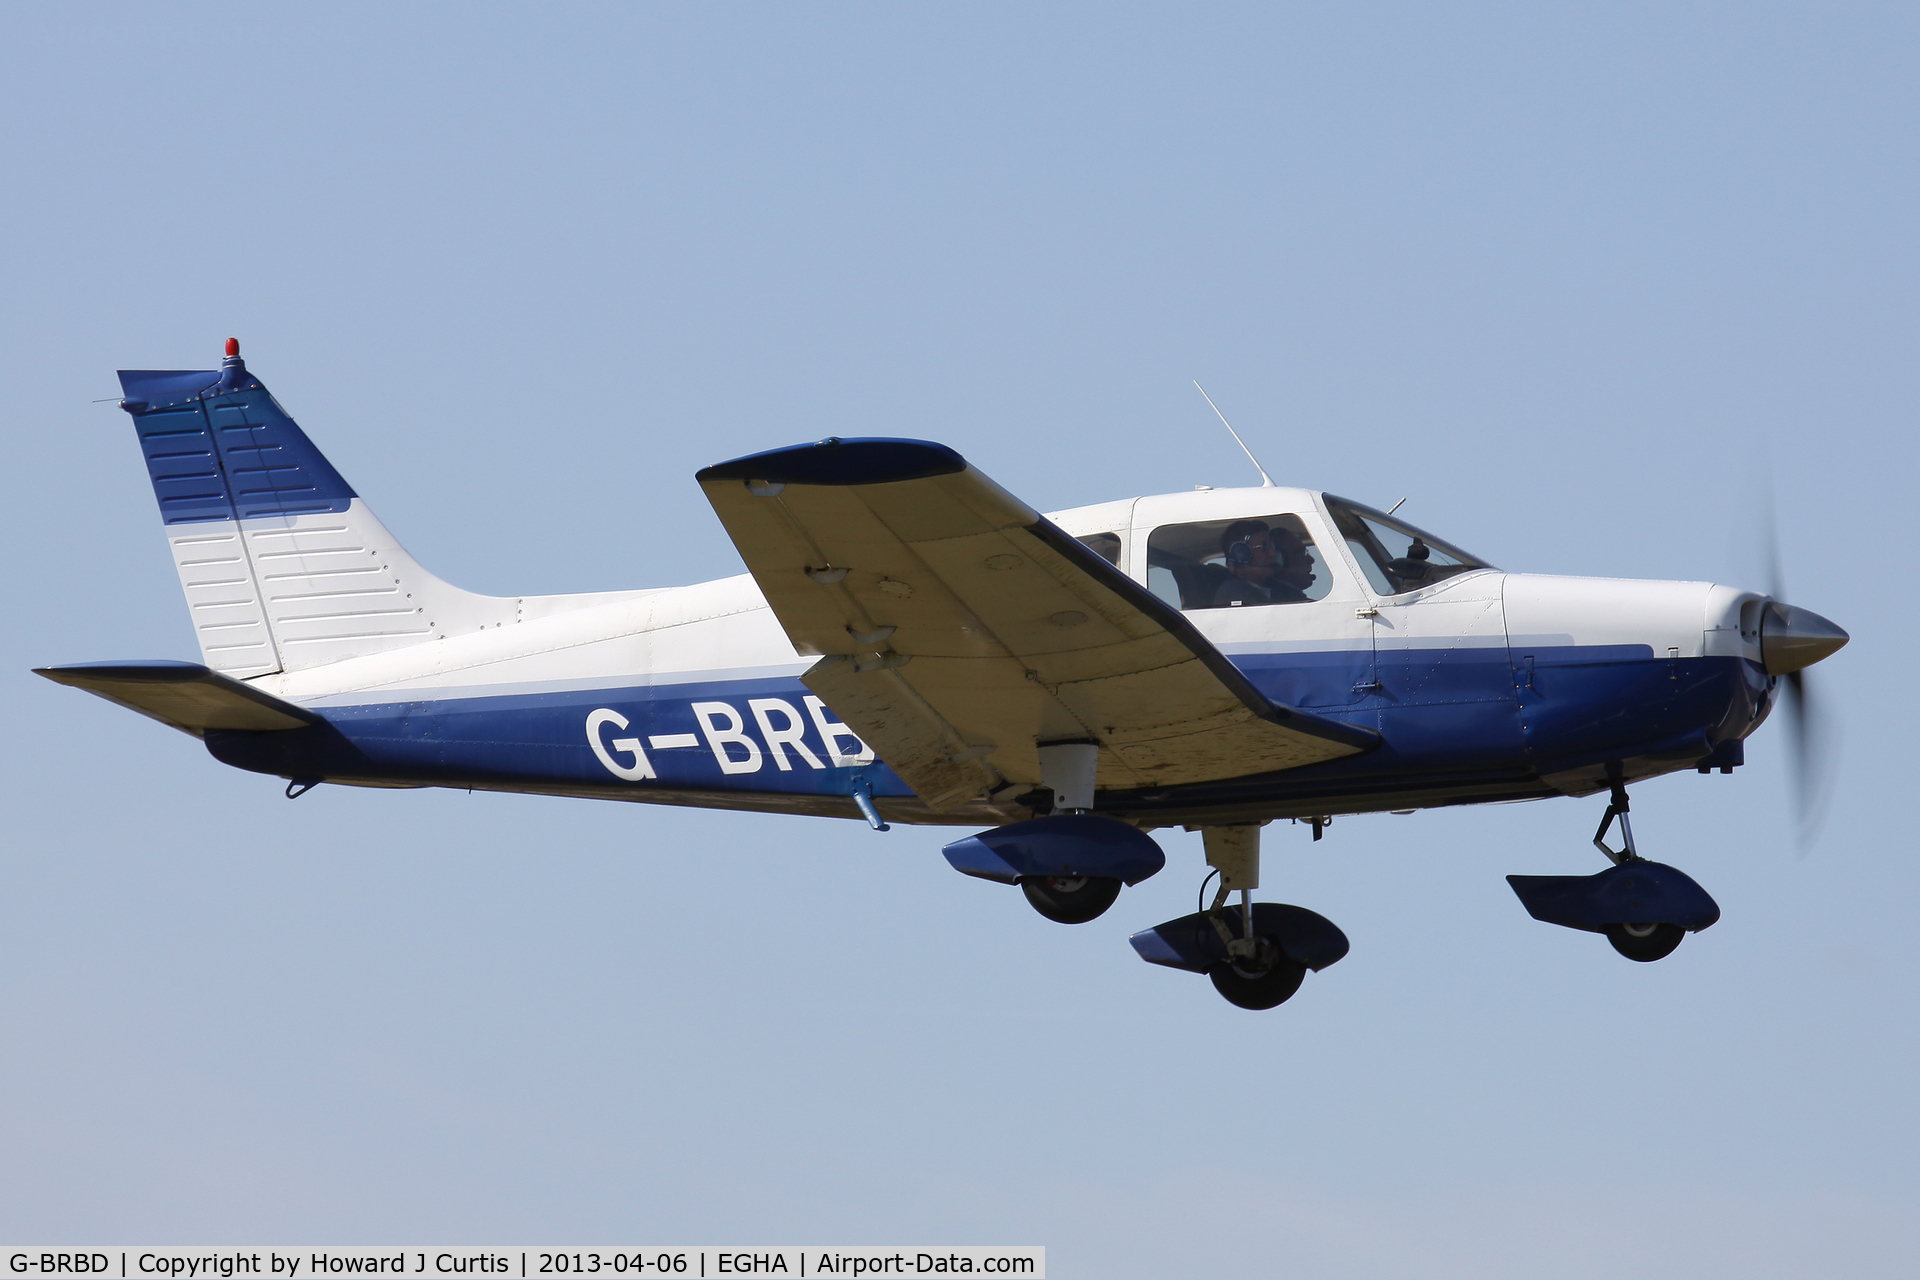 G-BRBD, 1974 Piper PA-28-151 Cherokee Warrior C/N 28-7415315, Privately owned. Caught on departure, a resident here.